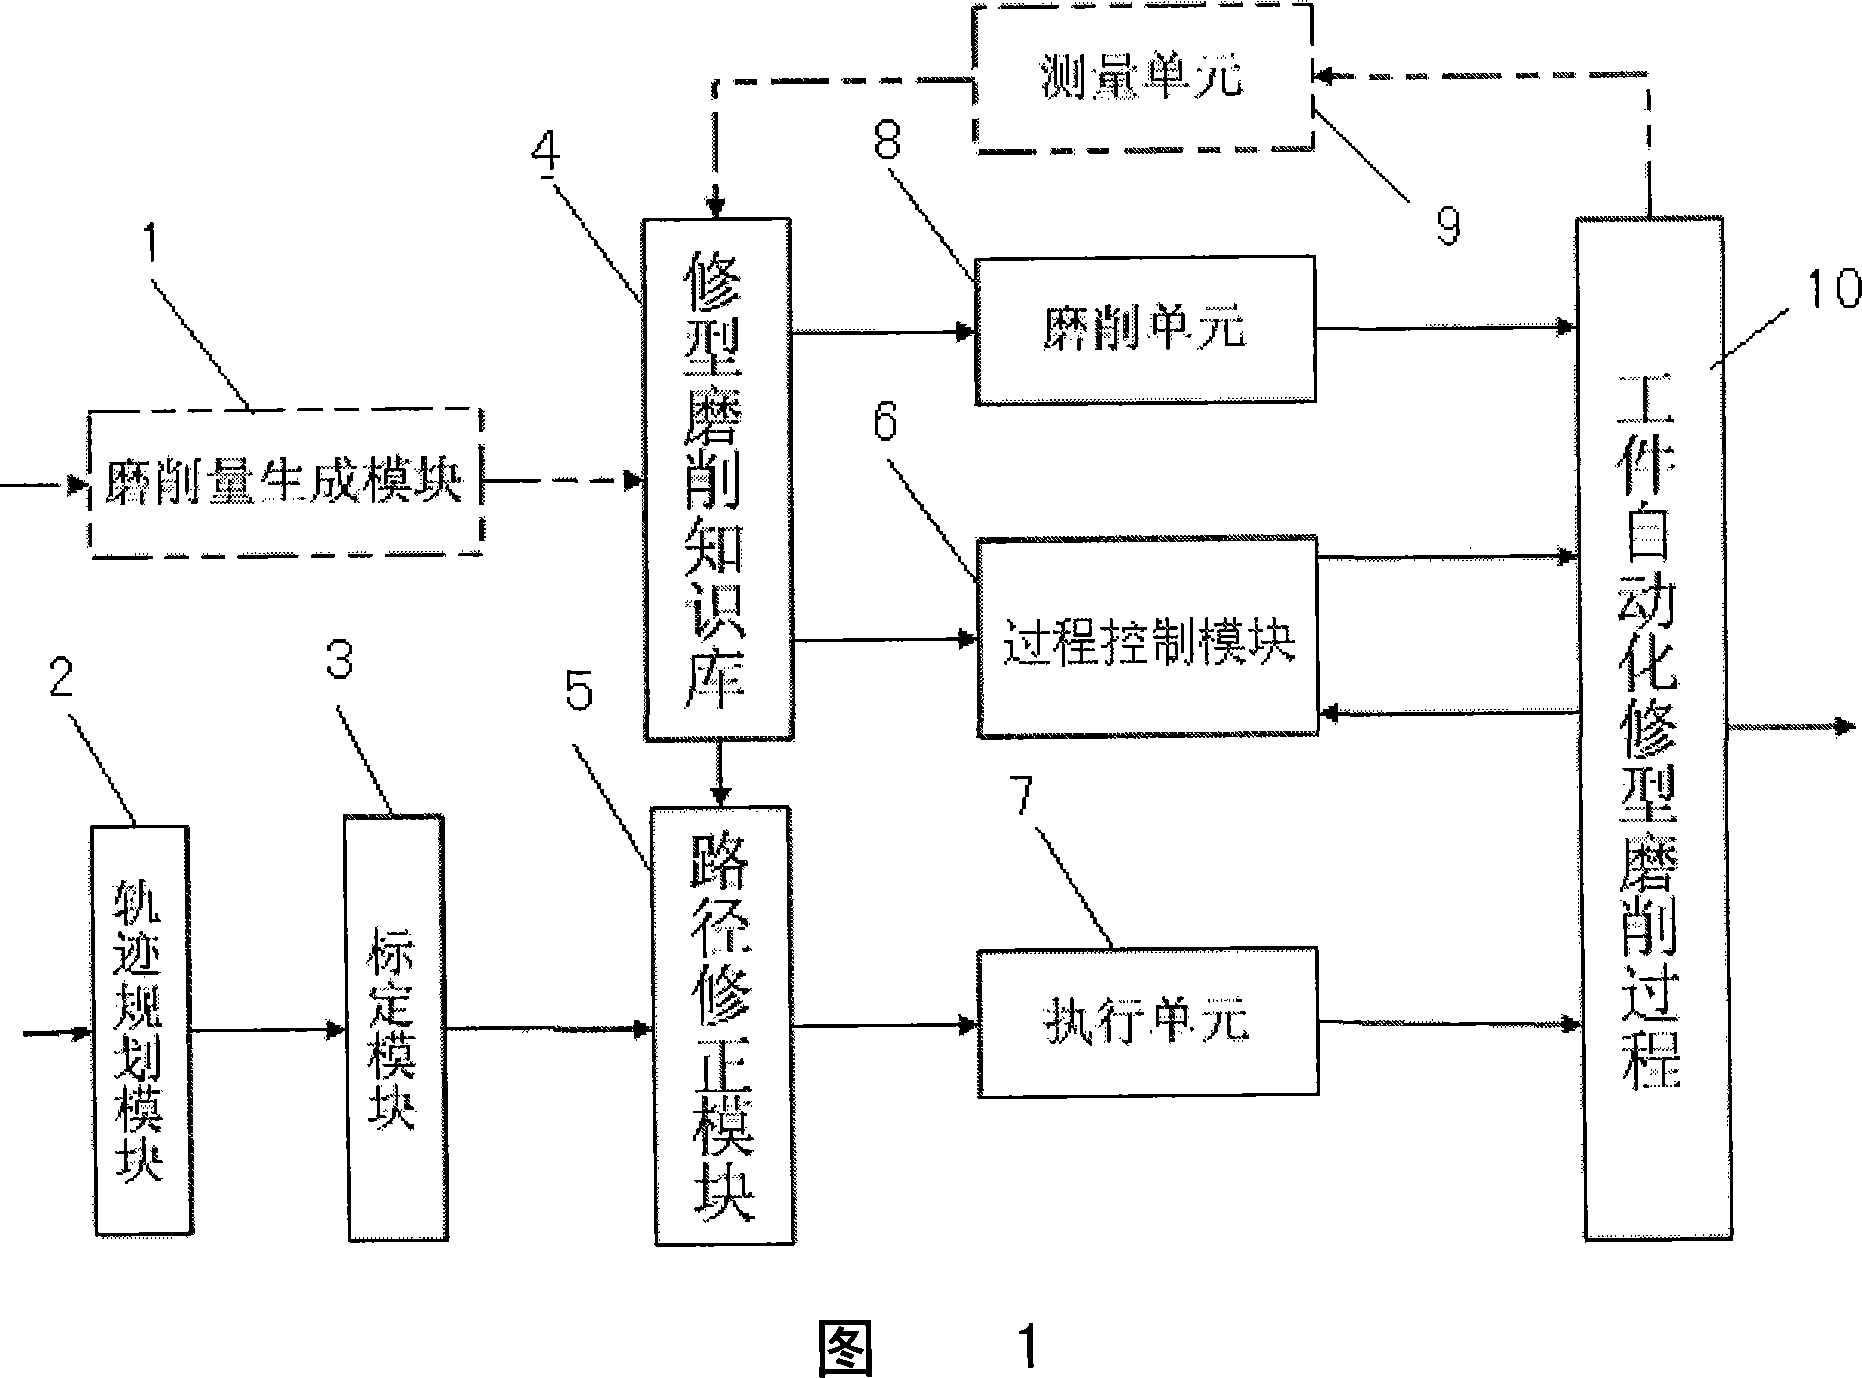 Abrasive belt grinding processing method and device capable of automatic repair and maintain for workpiece